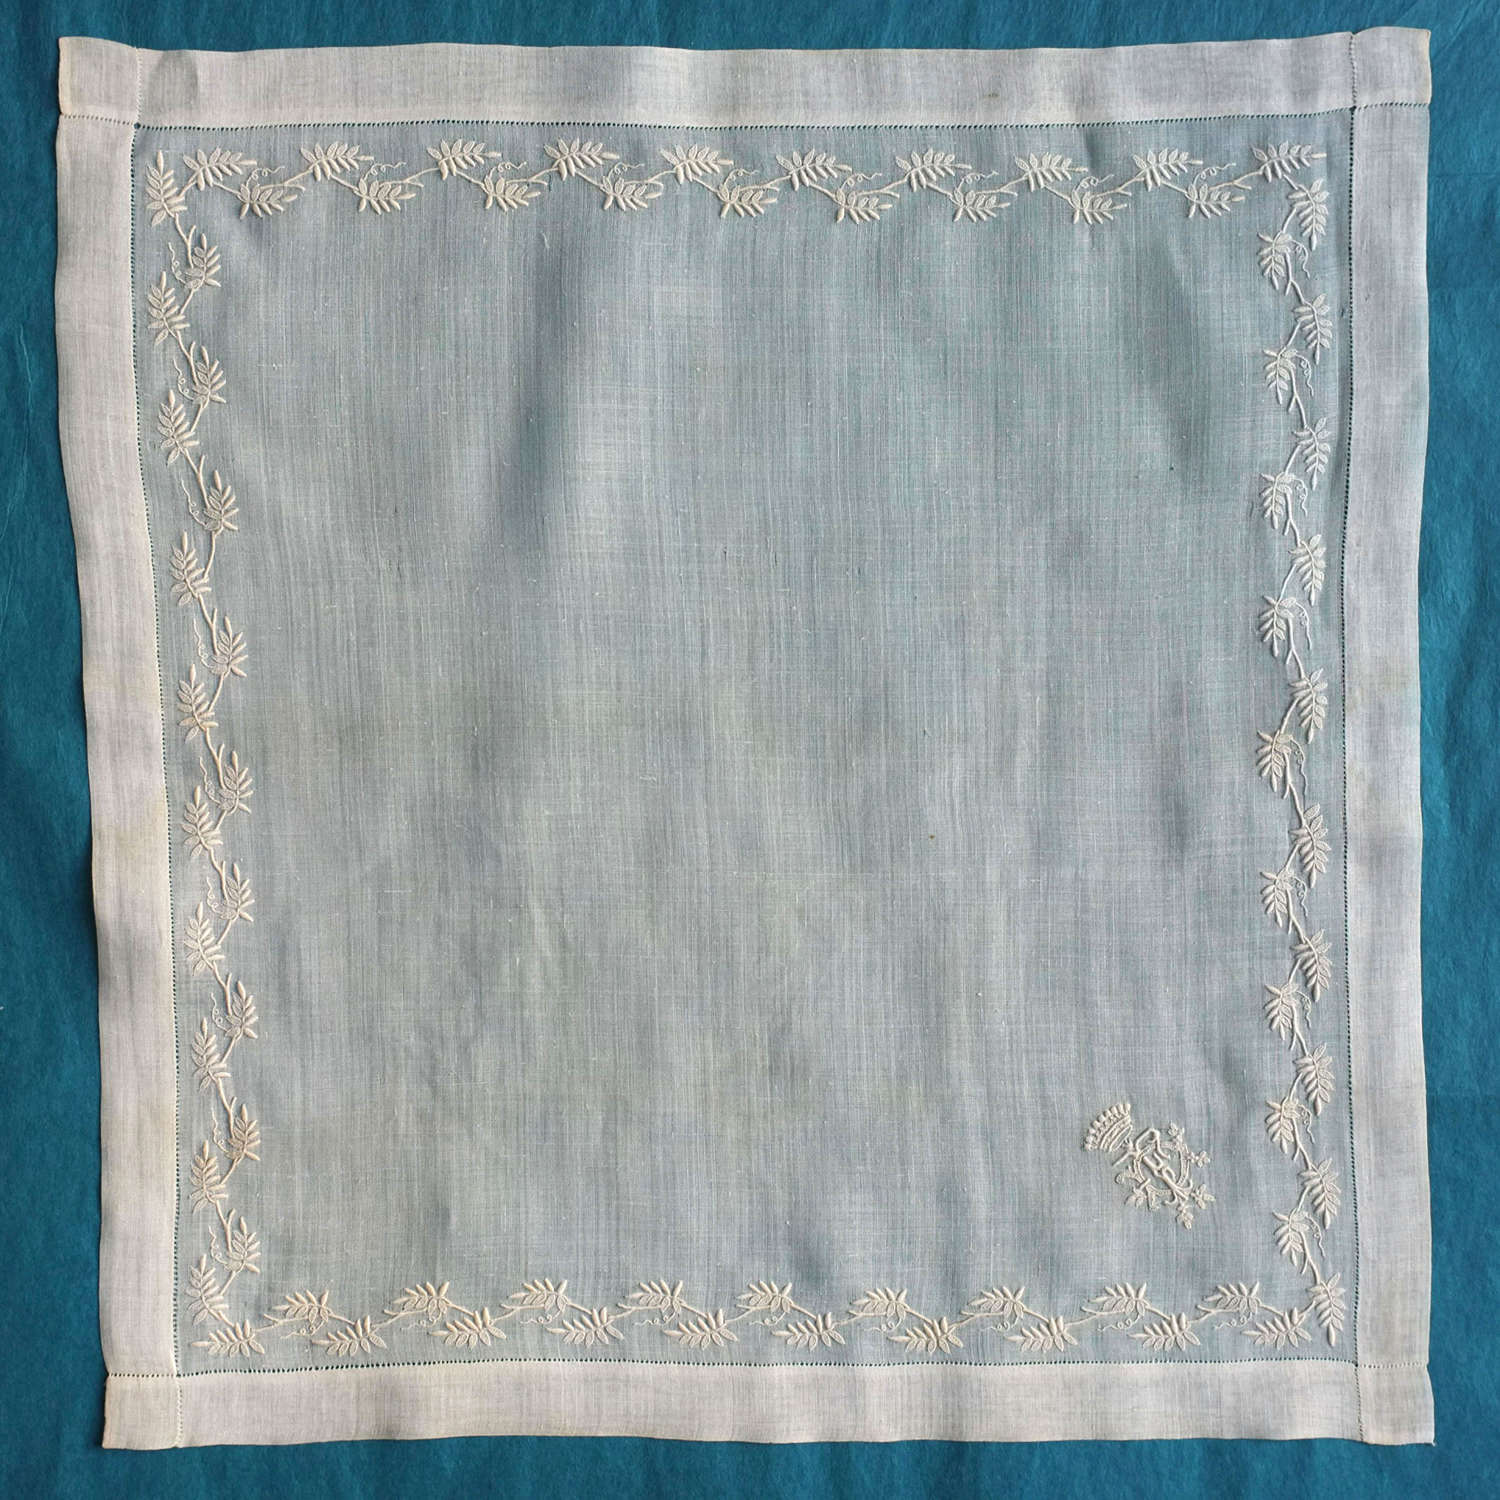 Antique Whitework Handkerchief with Leaf Border and Coronet